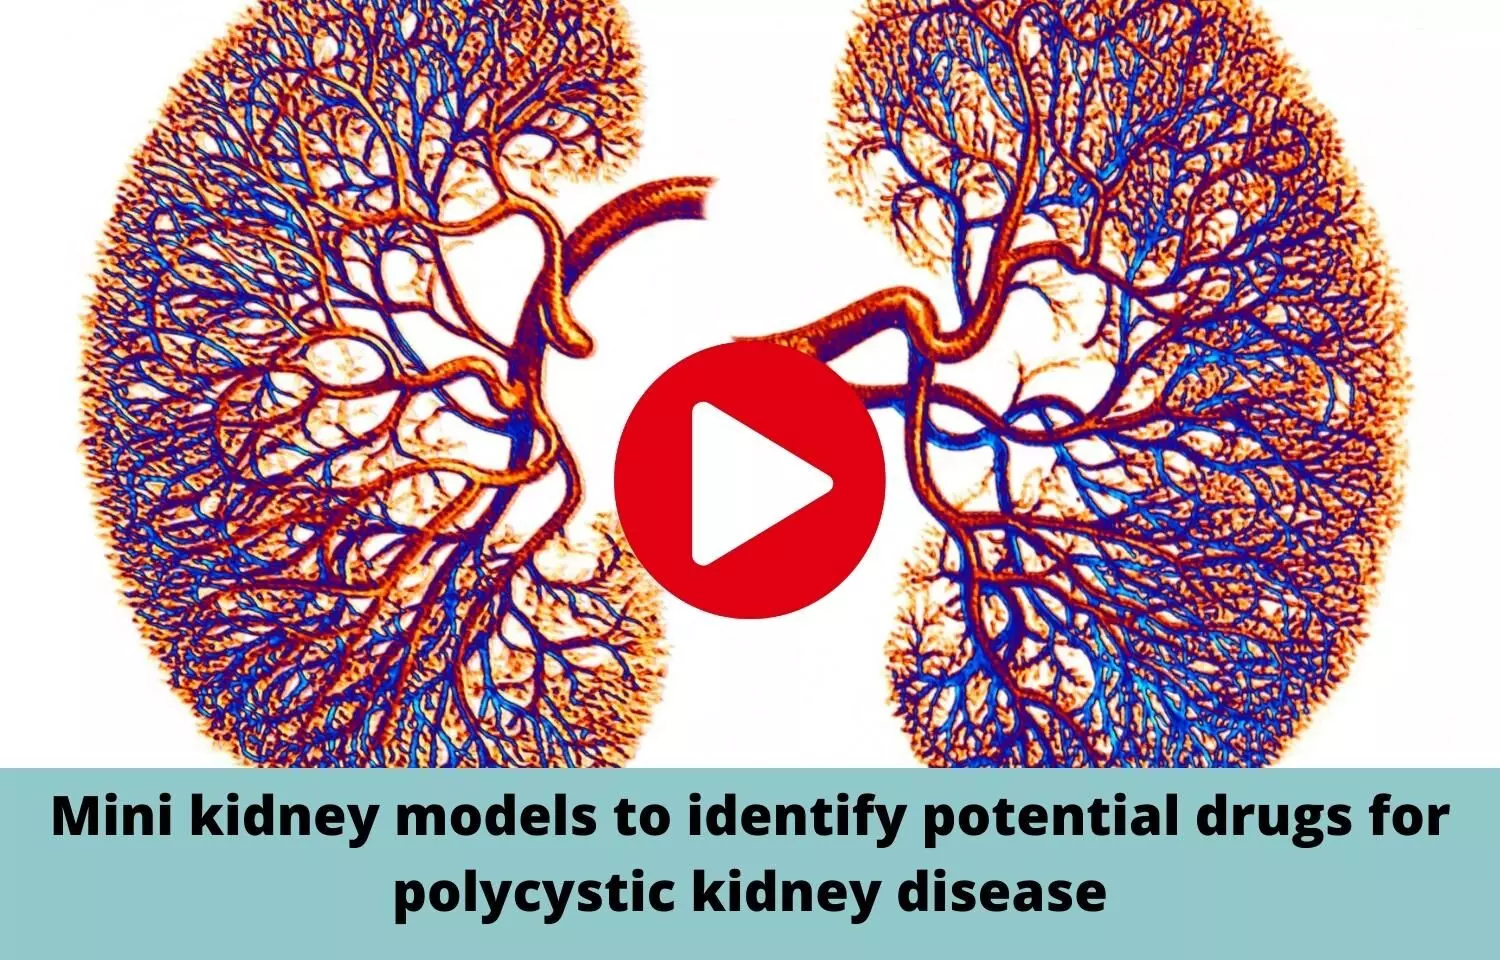 Mini kidney models to identify potential drugs for polycystic kidney disease